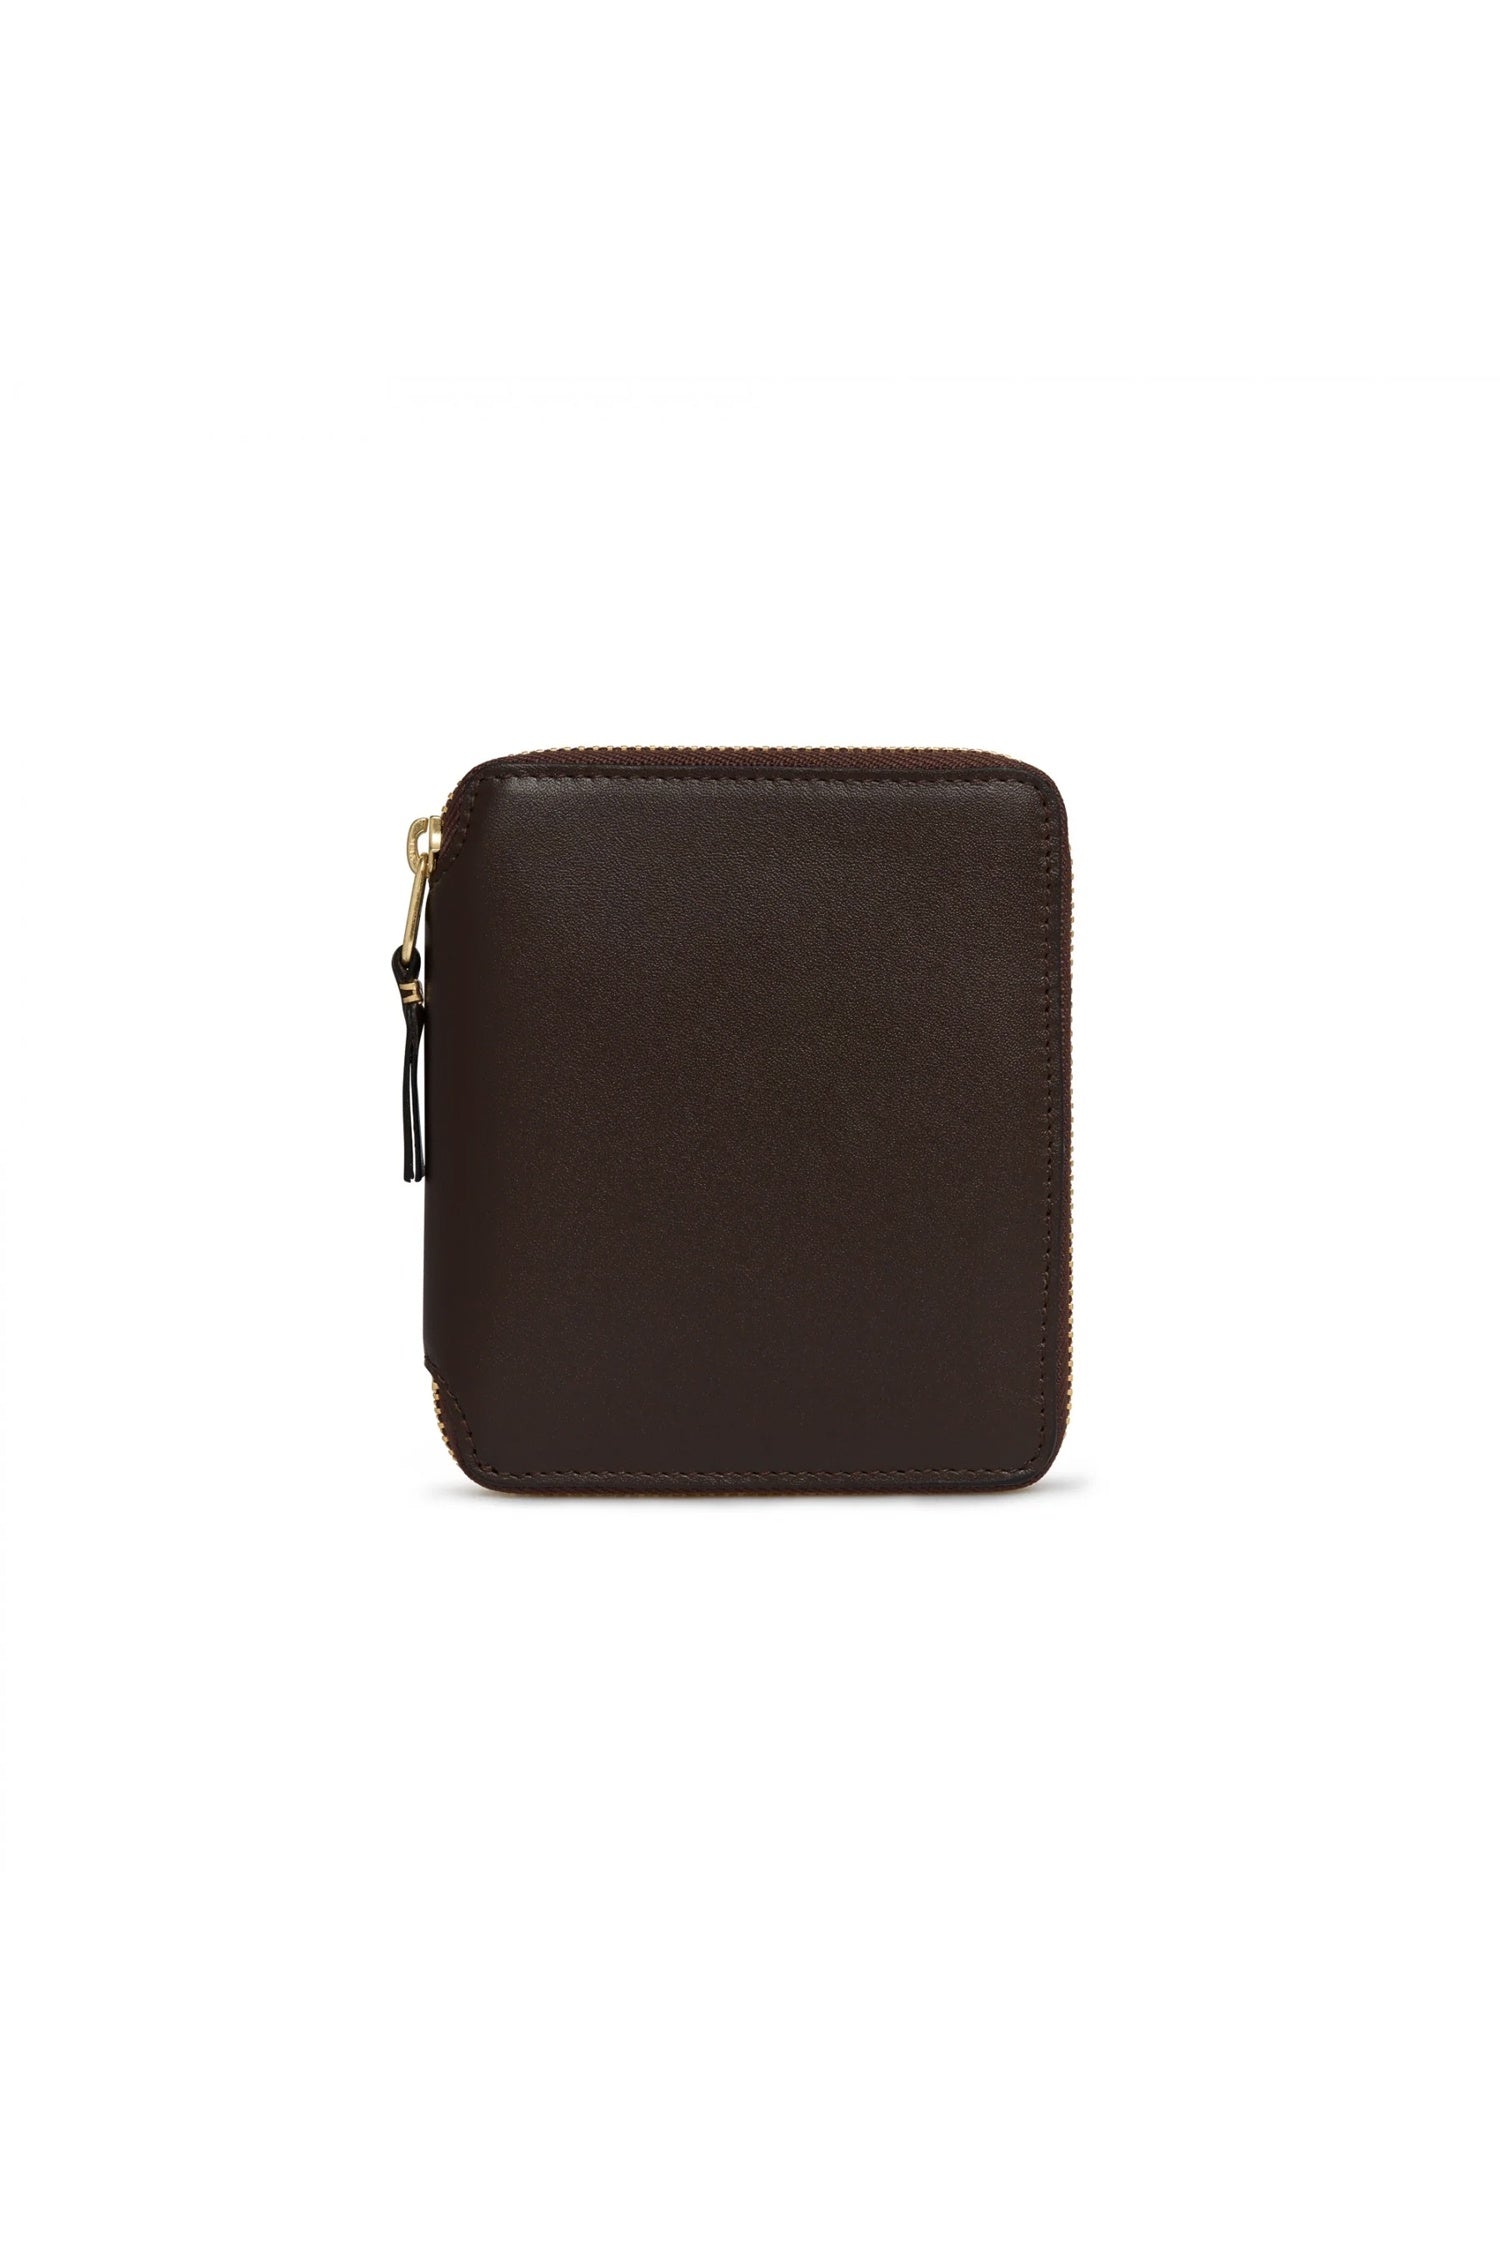 CLASSIC GROUP WALLET IN BROWN, W24